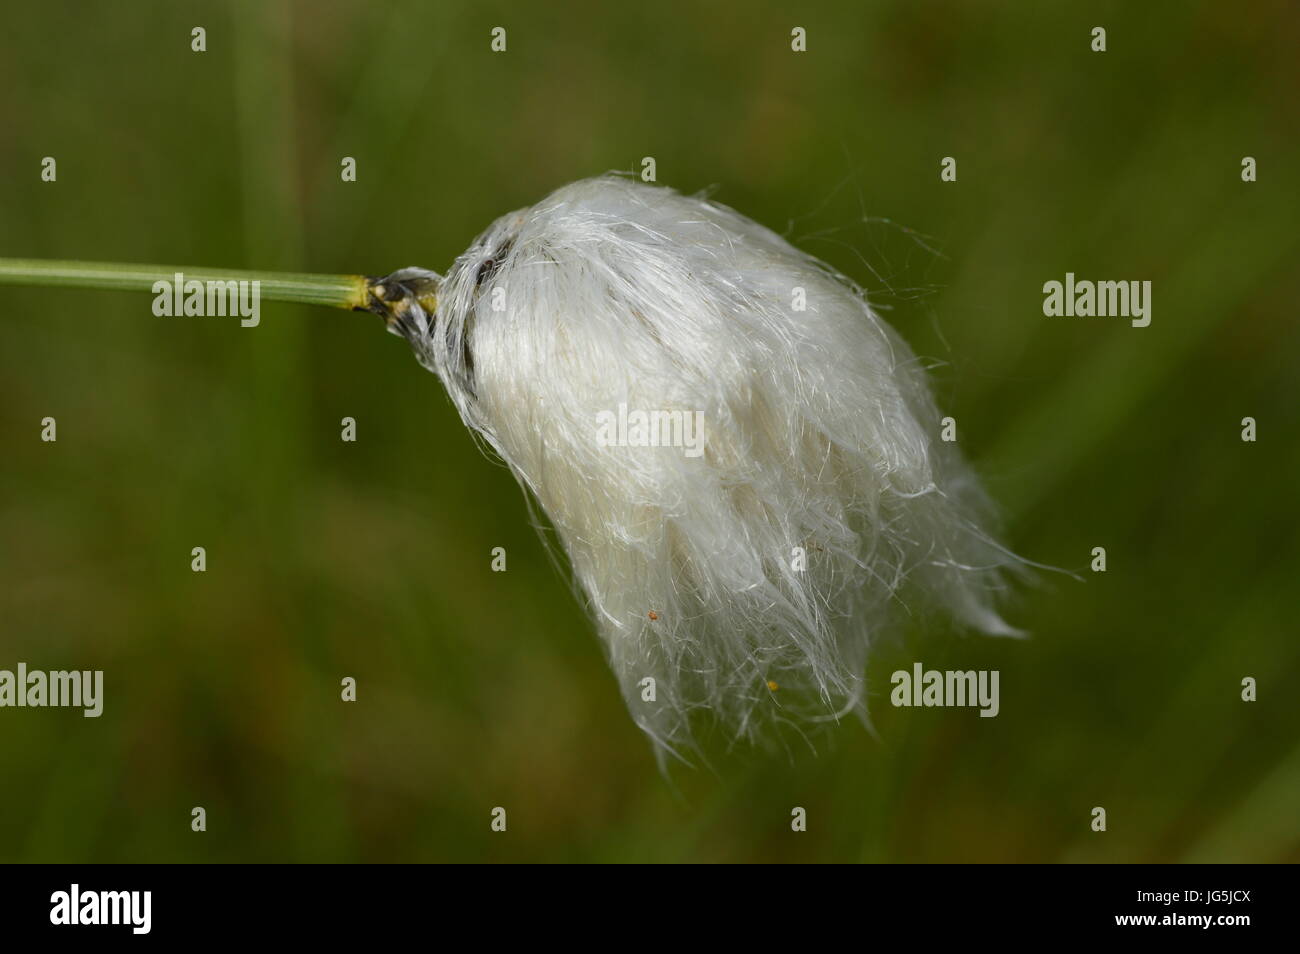 White fluffy beauty of nature swamp of cotton grass Stock Photo